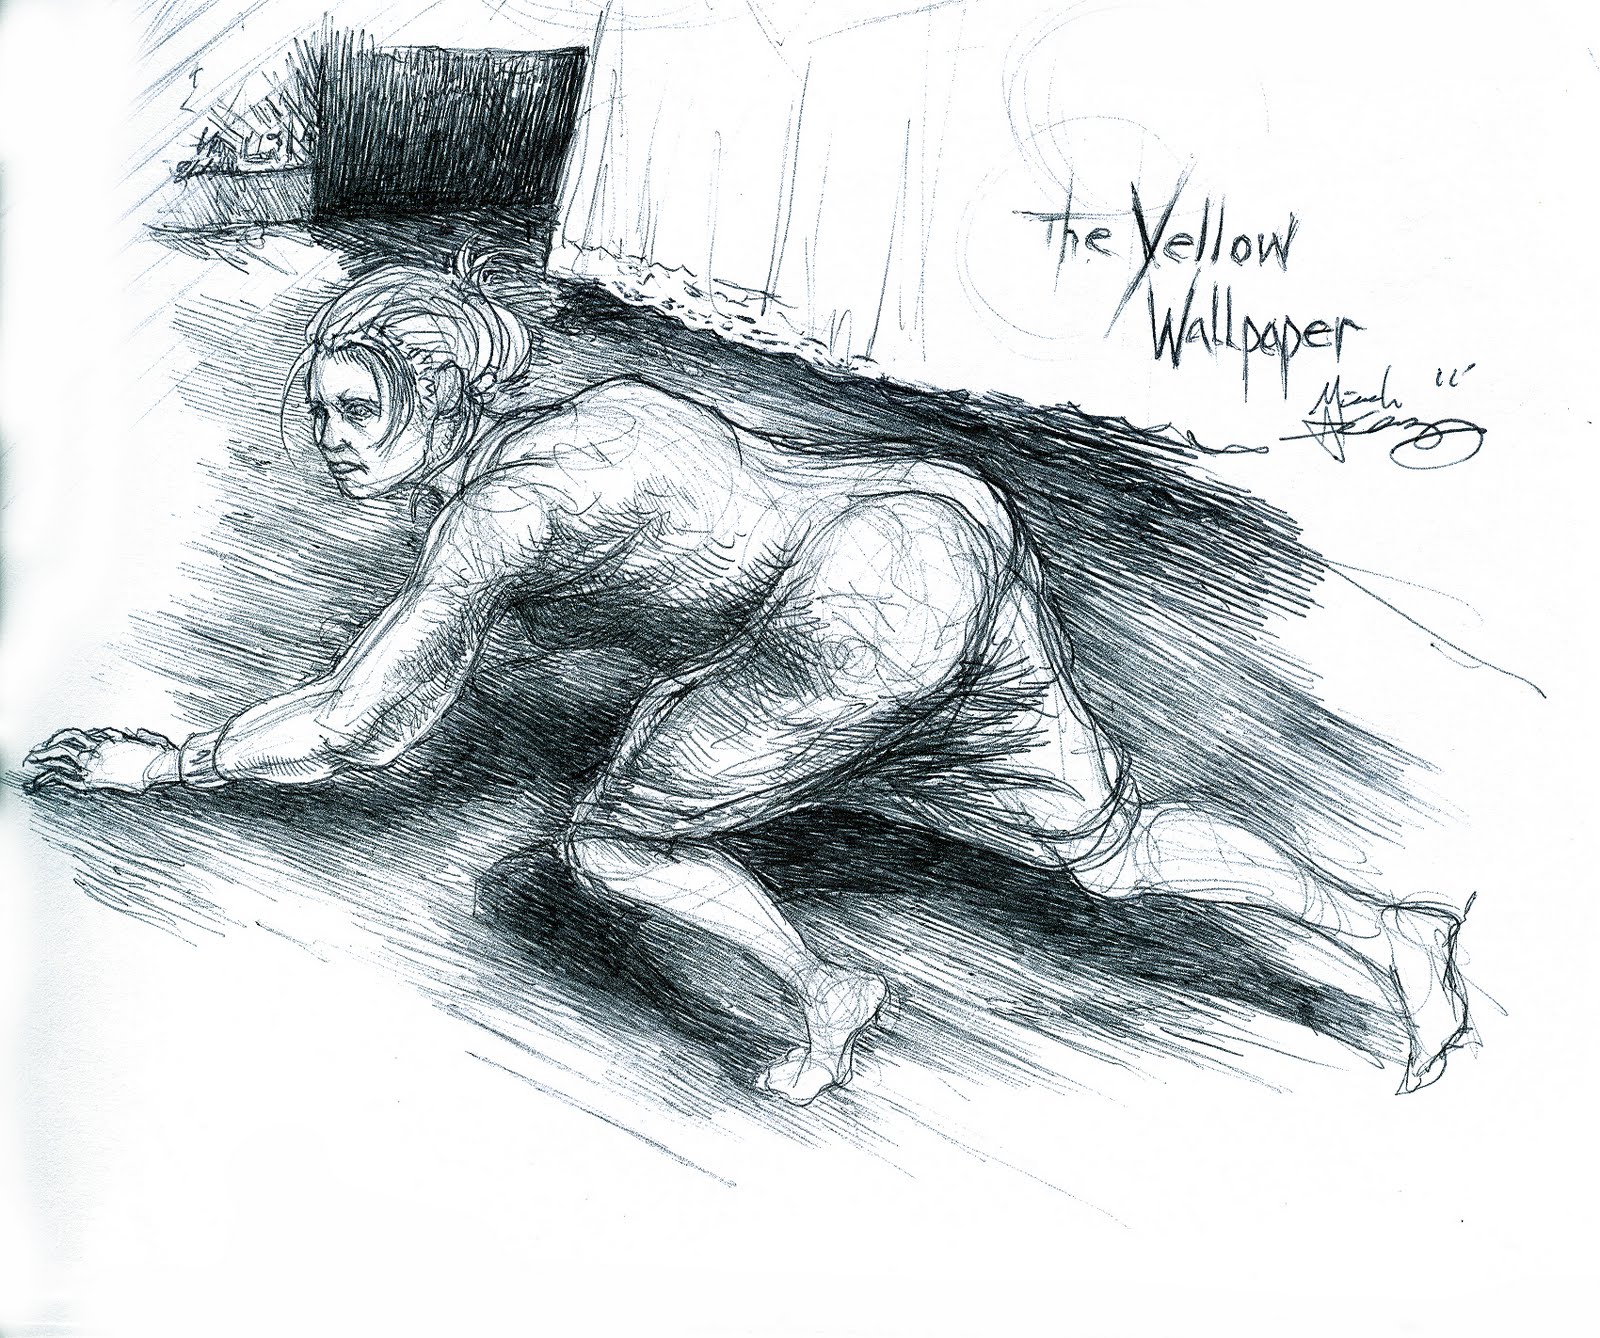 Short Story The Yellow Wallpaper 2015 Best Auto Reviews